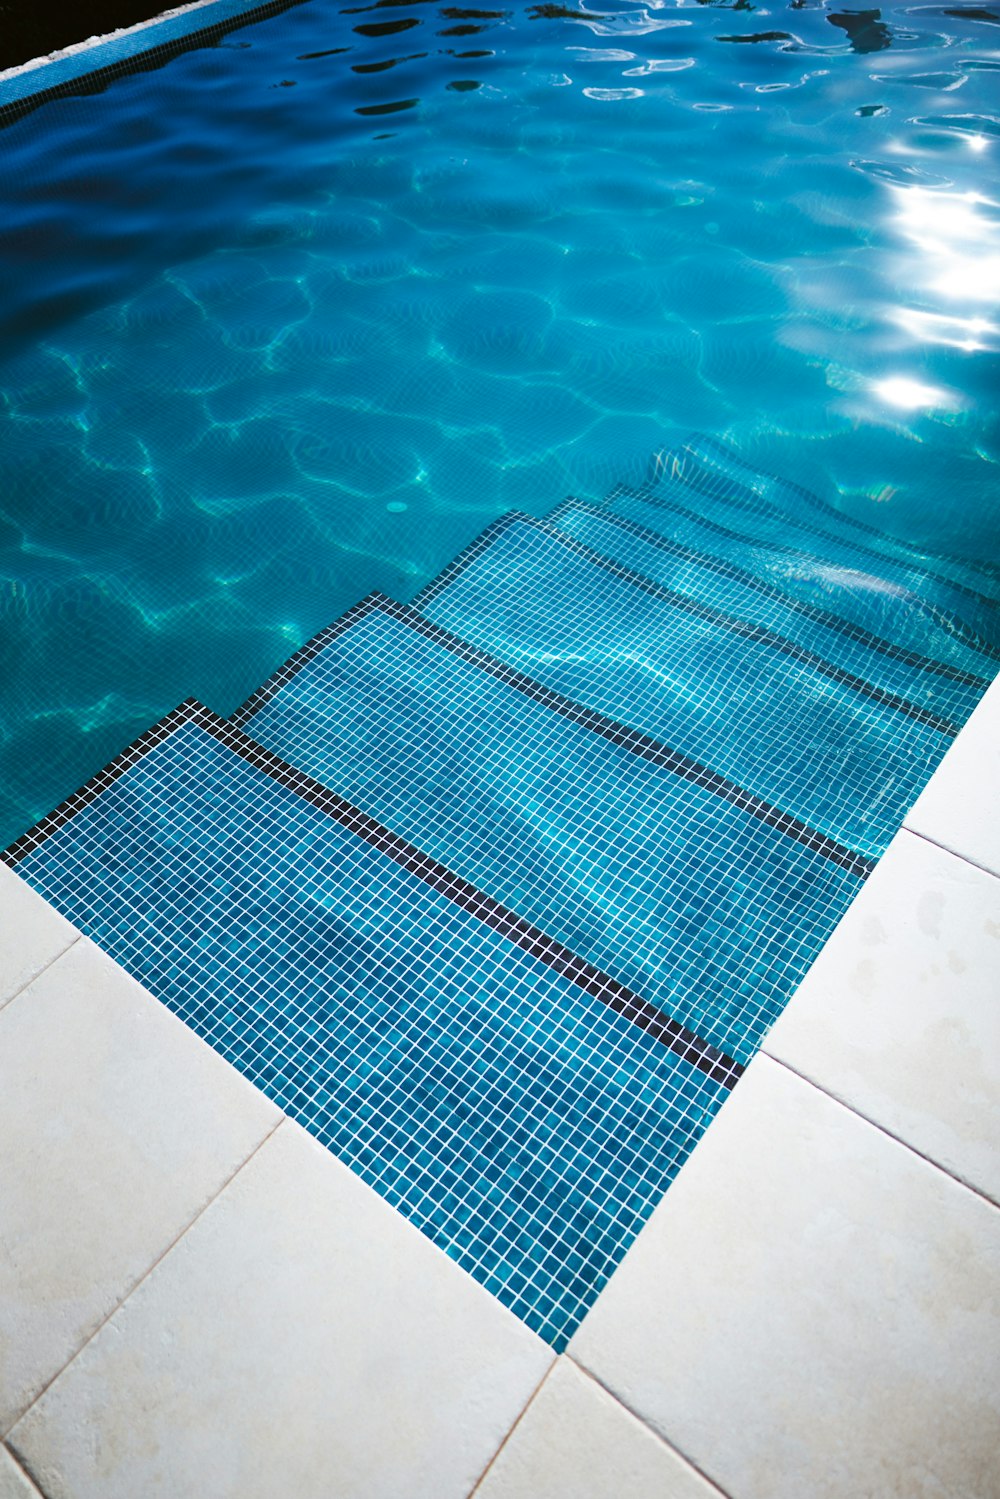 a blue swimming pool with a white tiled floor